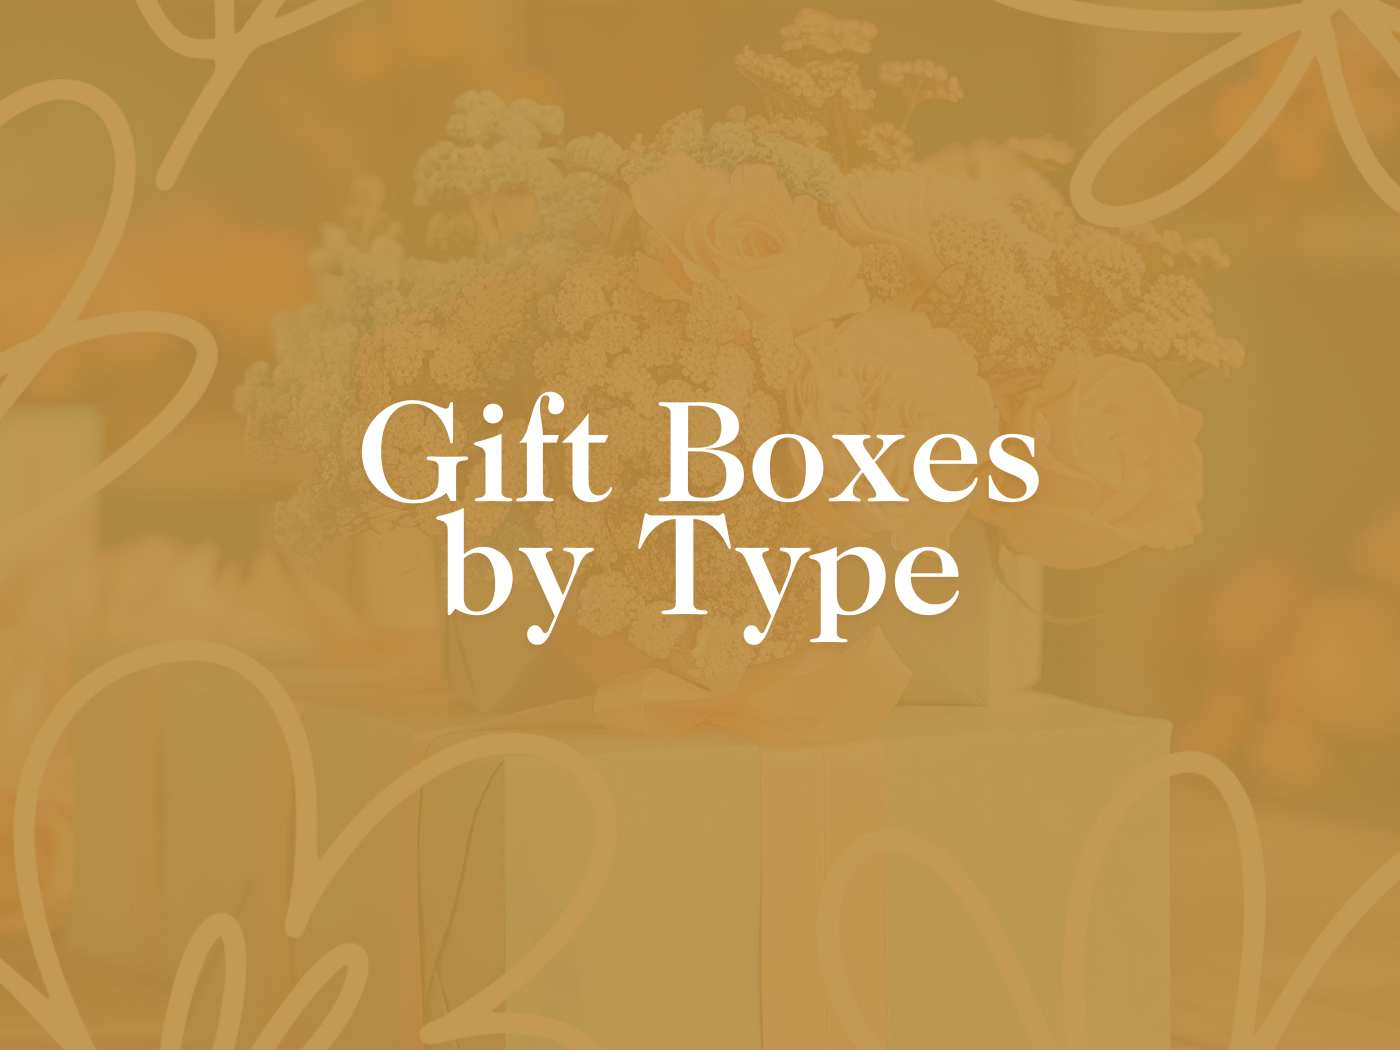 Elegant display of various Gift Boxes by Type, adorned with soft floral arrangements in a muted color palette, showcasing the range available at Fabulous Flowers and Gifts.